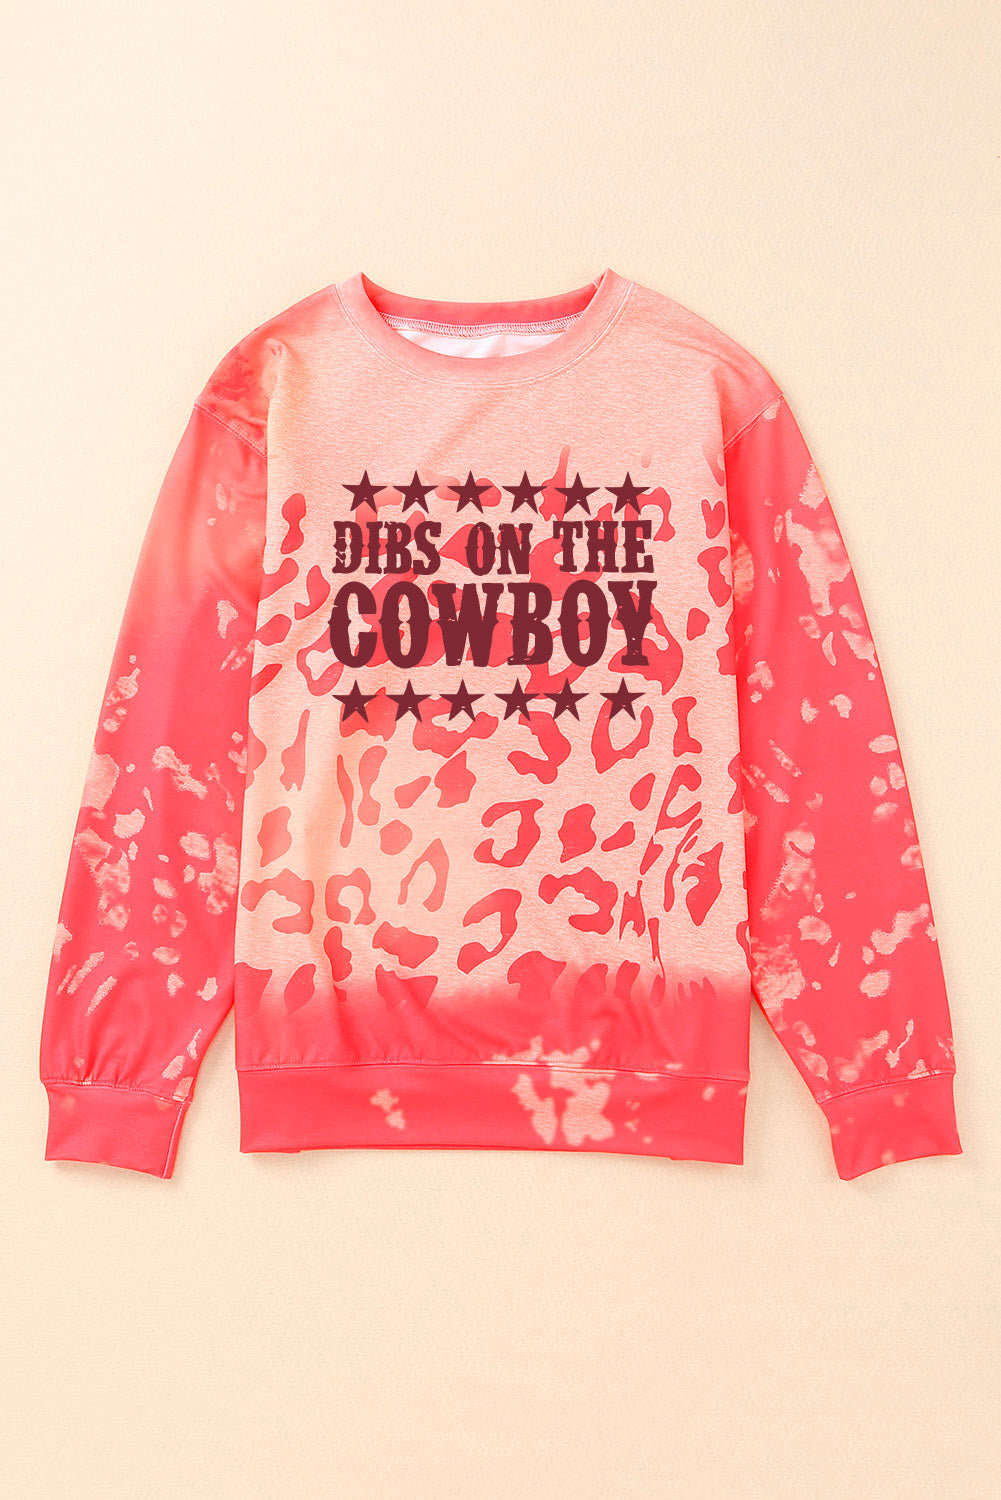 Round Neck Dropped Shoulder DIBS ON THE COWBOY Graphic Sweatshirt